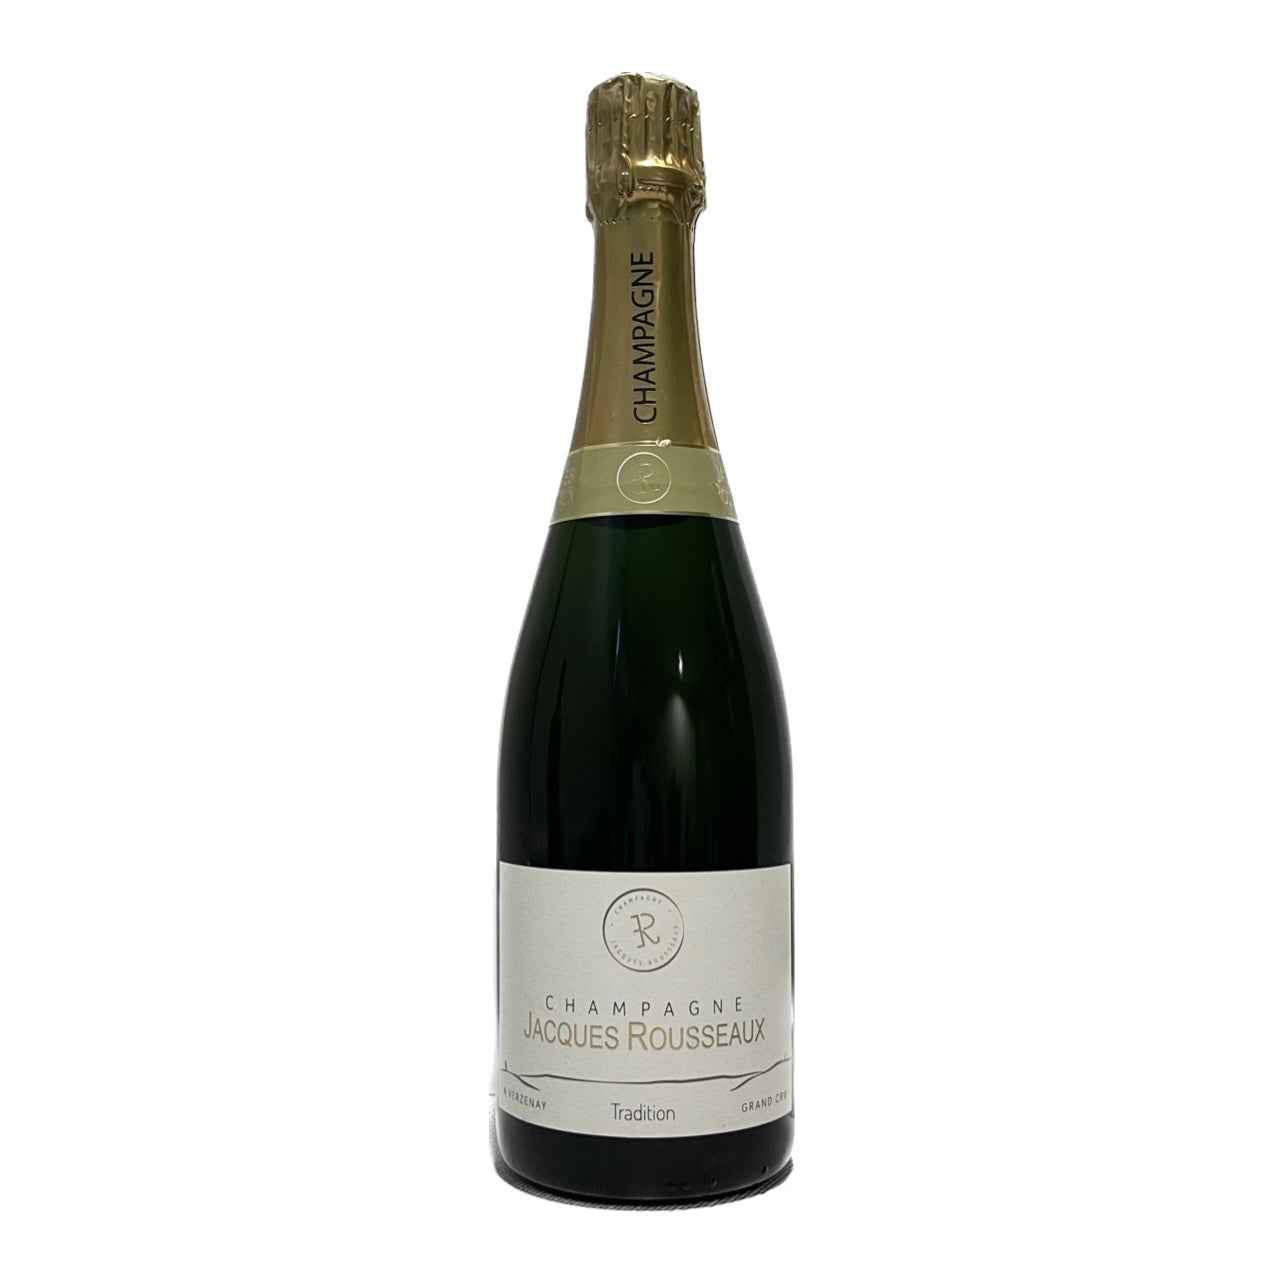 CHAMPAGNE GRAND CRU EXTRA BRUT "TRADITION" - JACQUES ROUSSEAUX